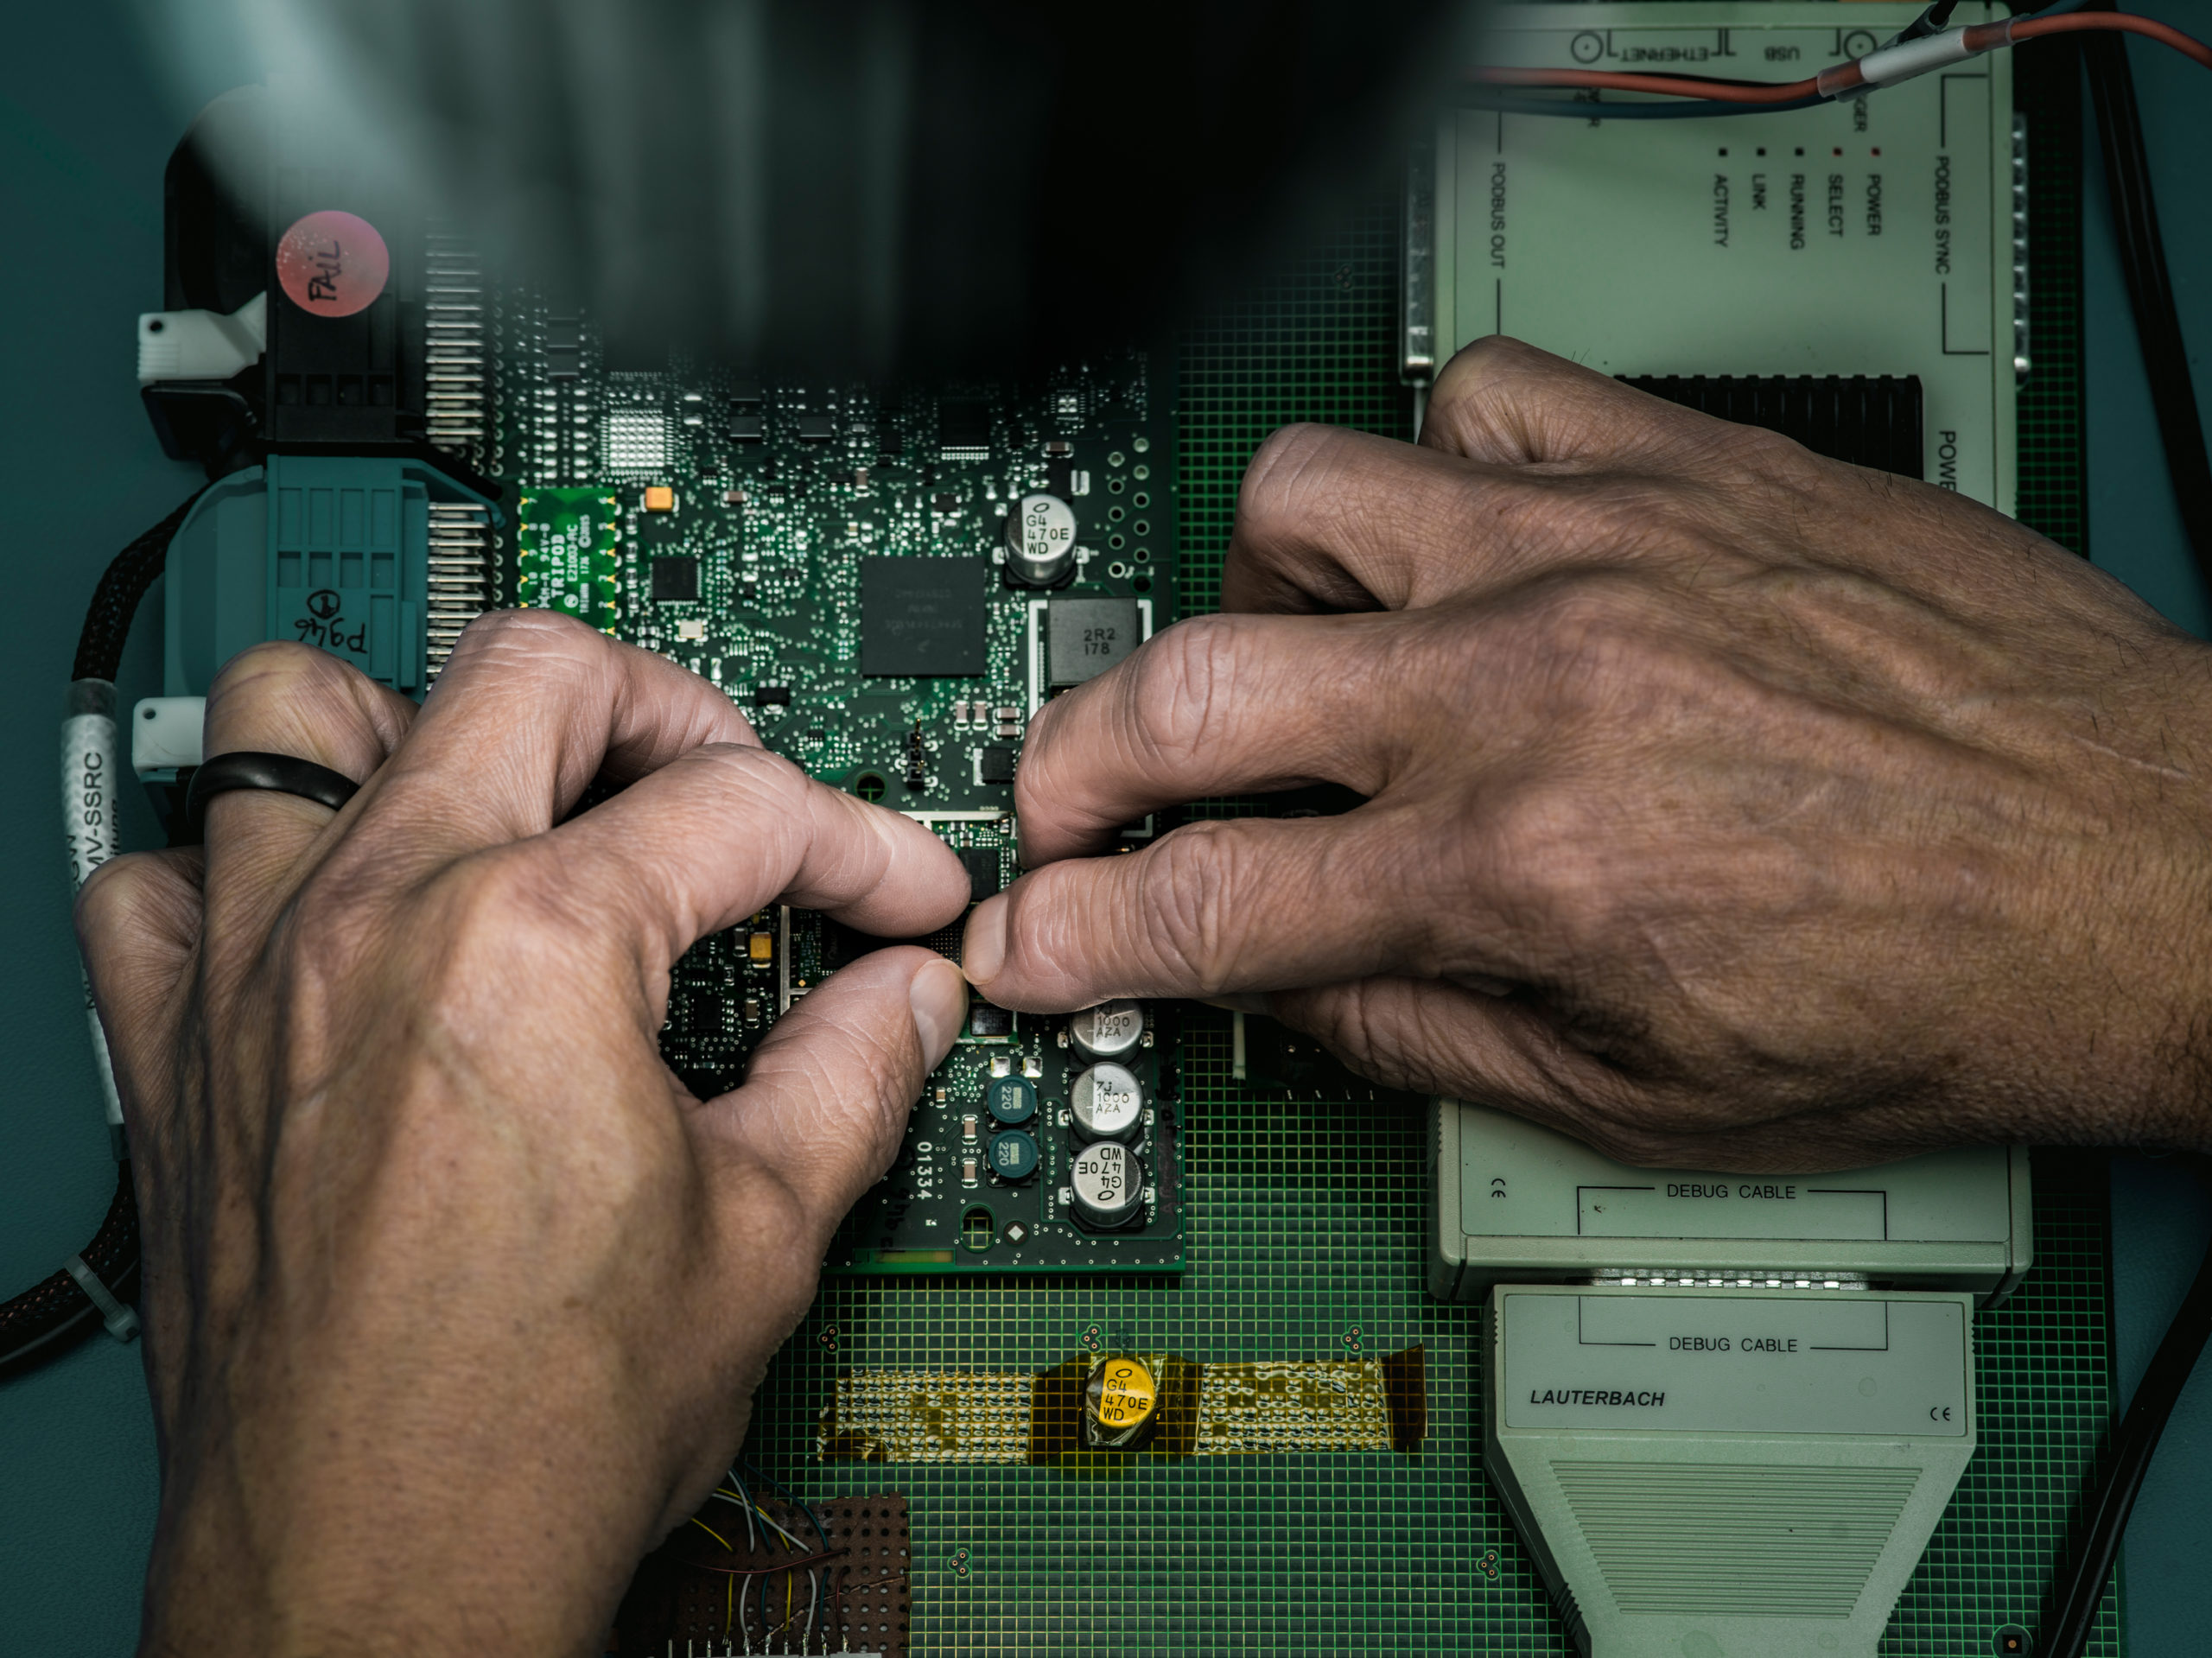 An engineer works on reparing a computer chip